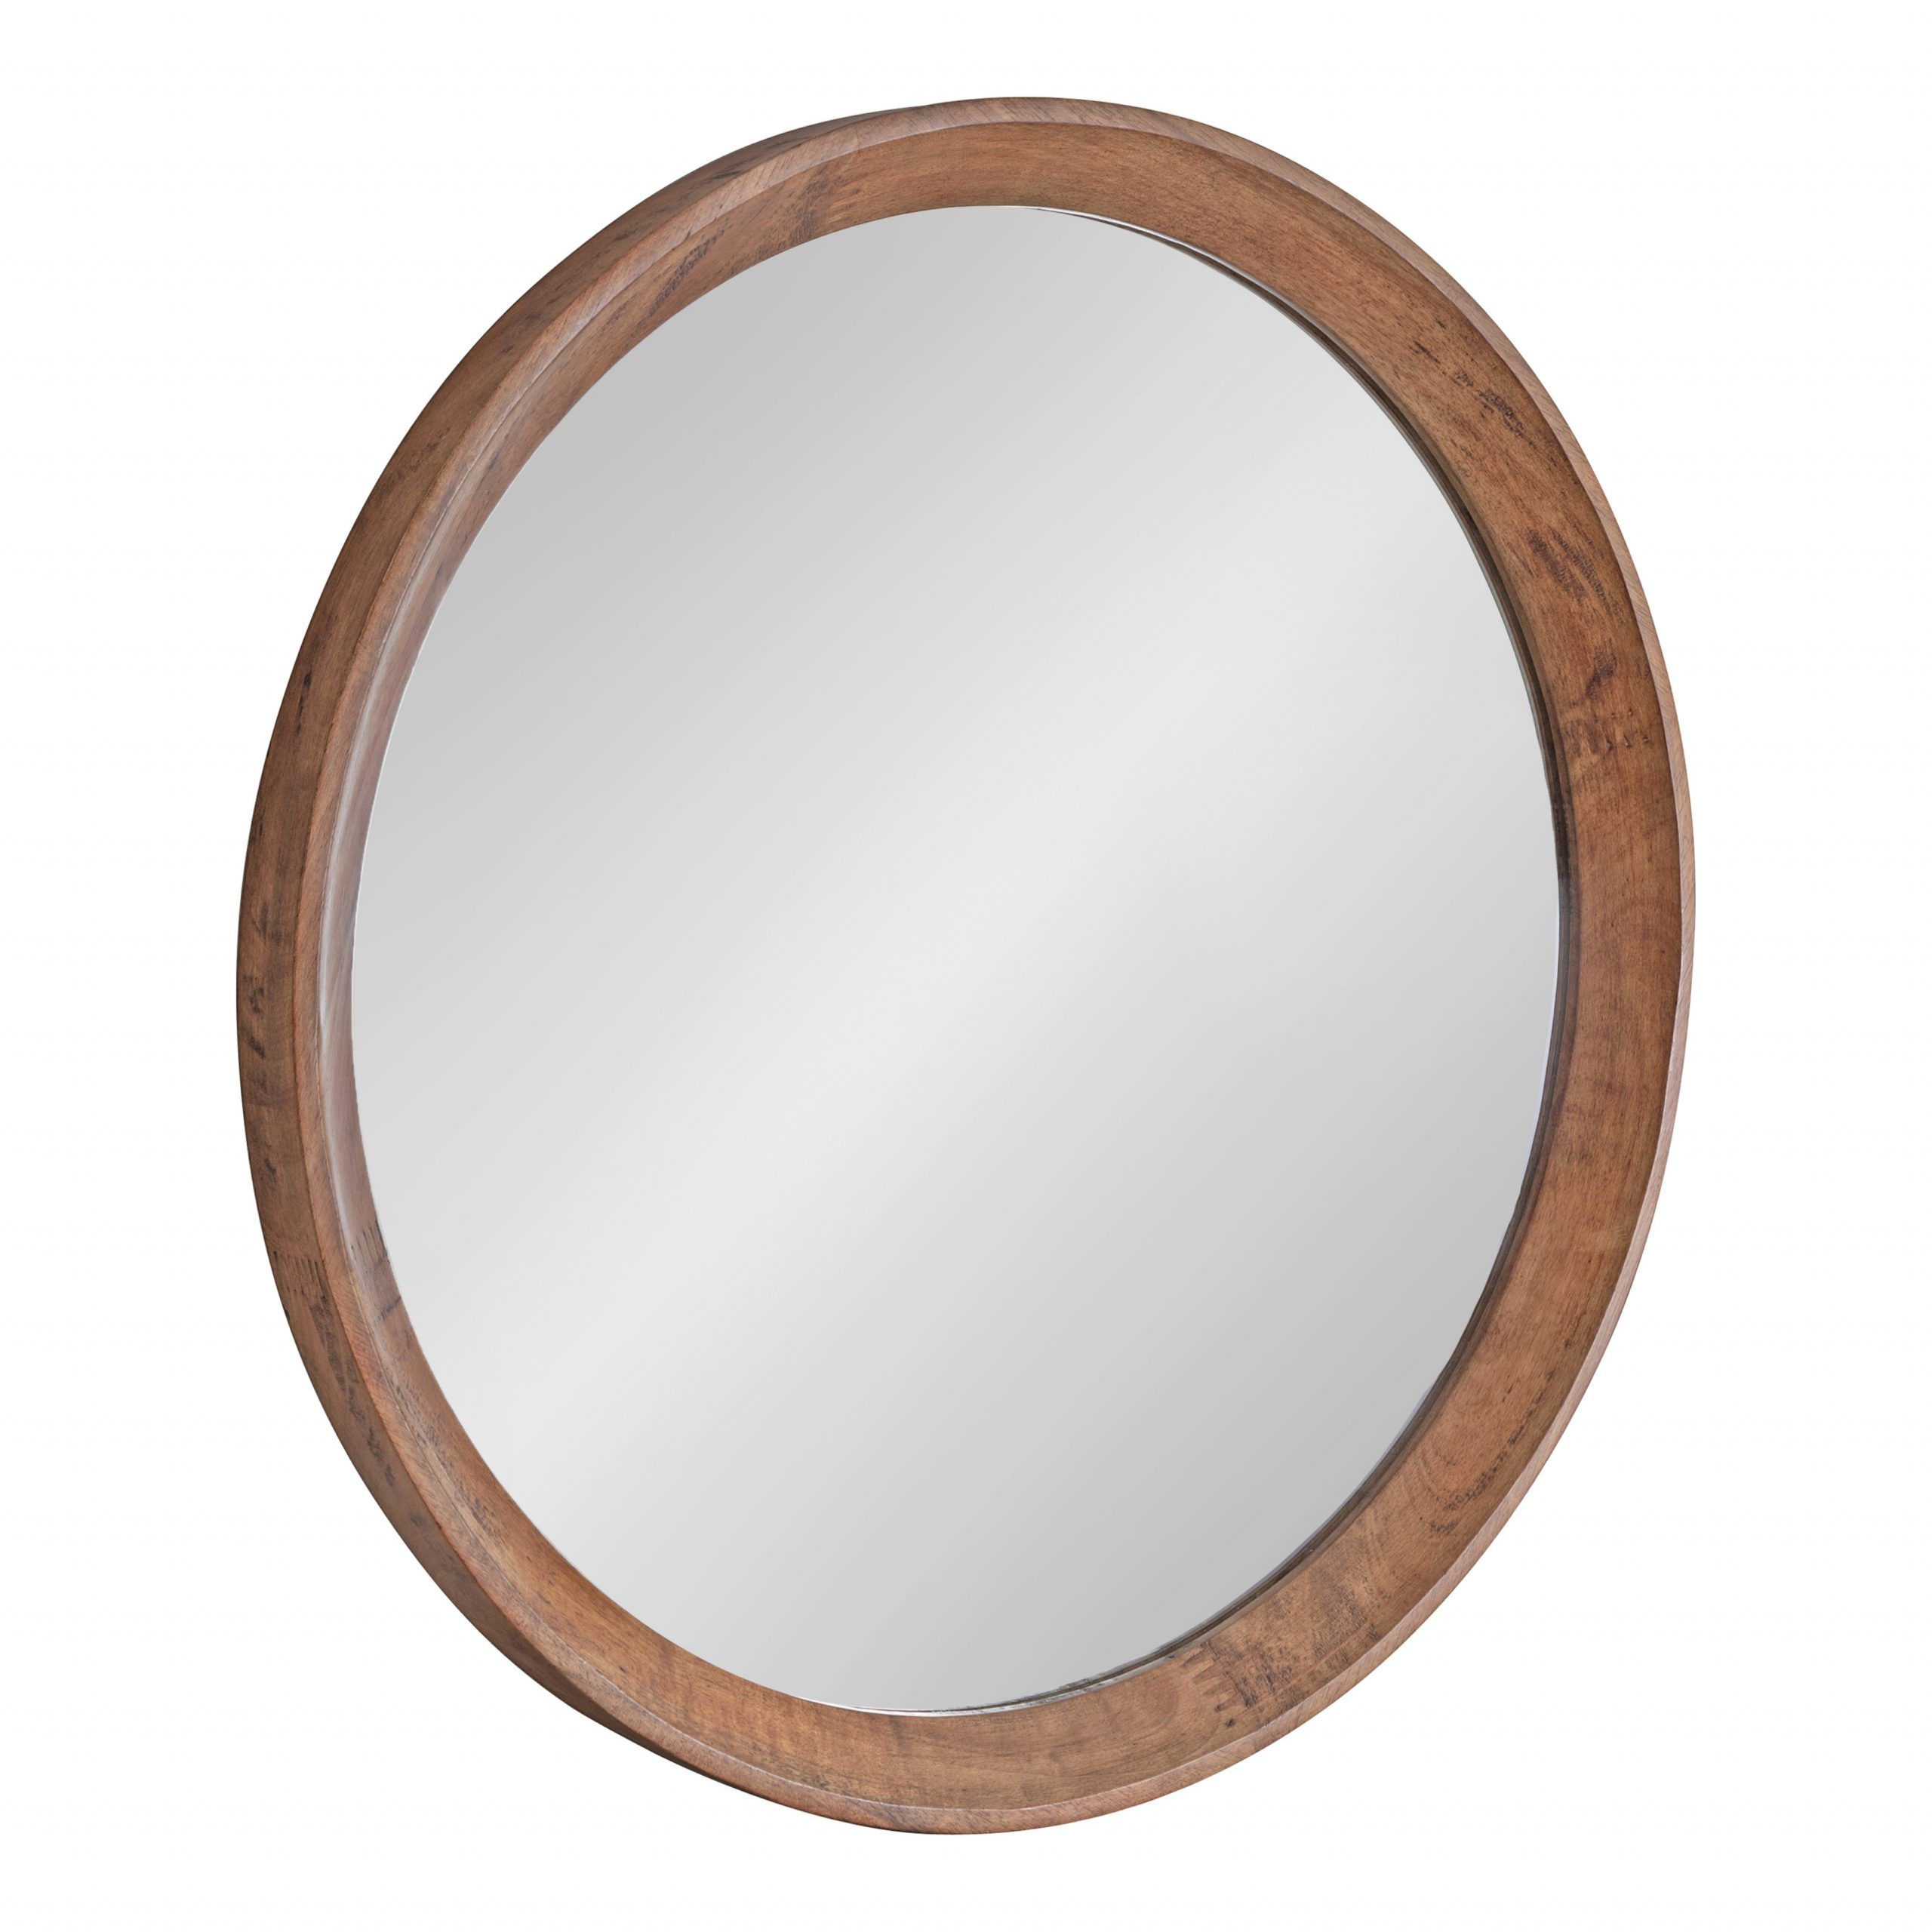 Kate And Laurel Hartman Transitional Round Wood Framed Wall Mirror, 30 Inside Mocha Brown Wall Mirrors (View 1 of 15)